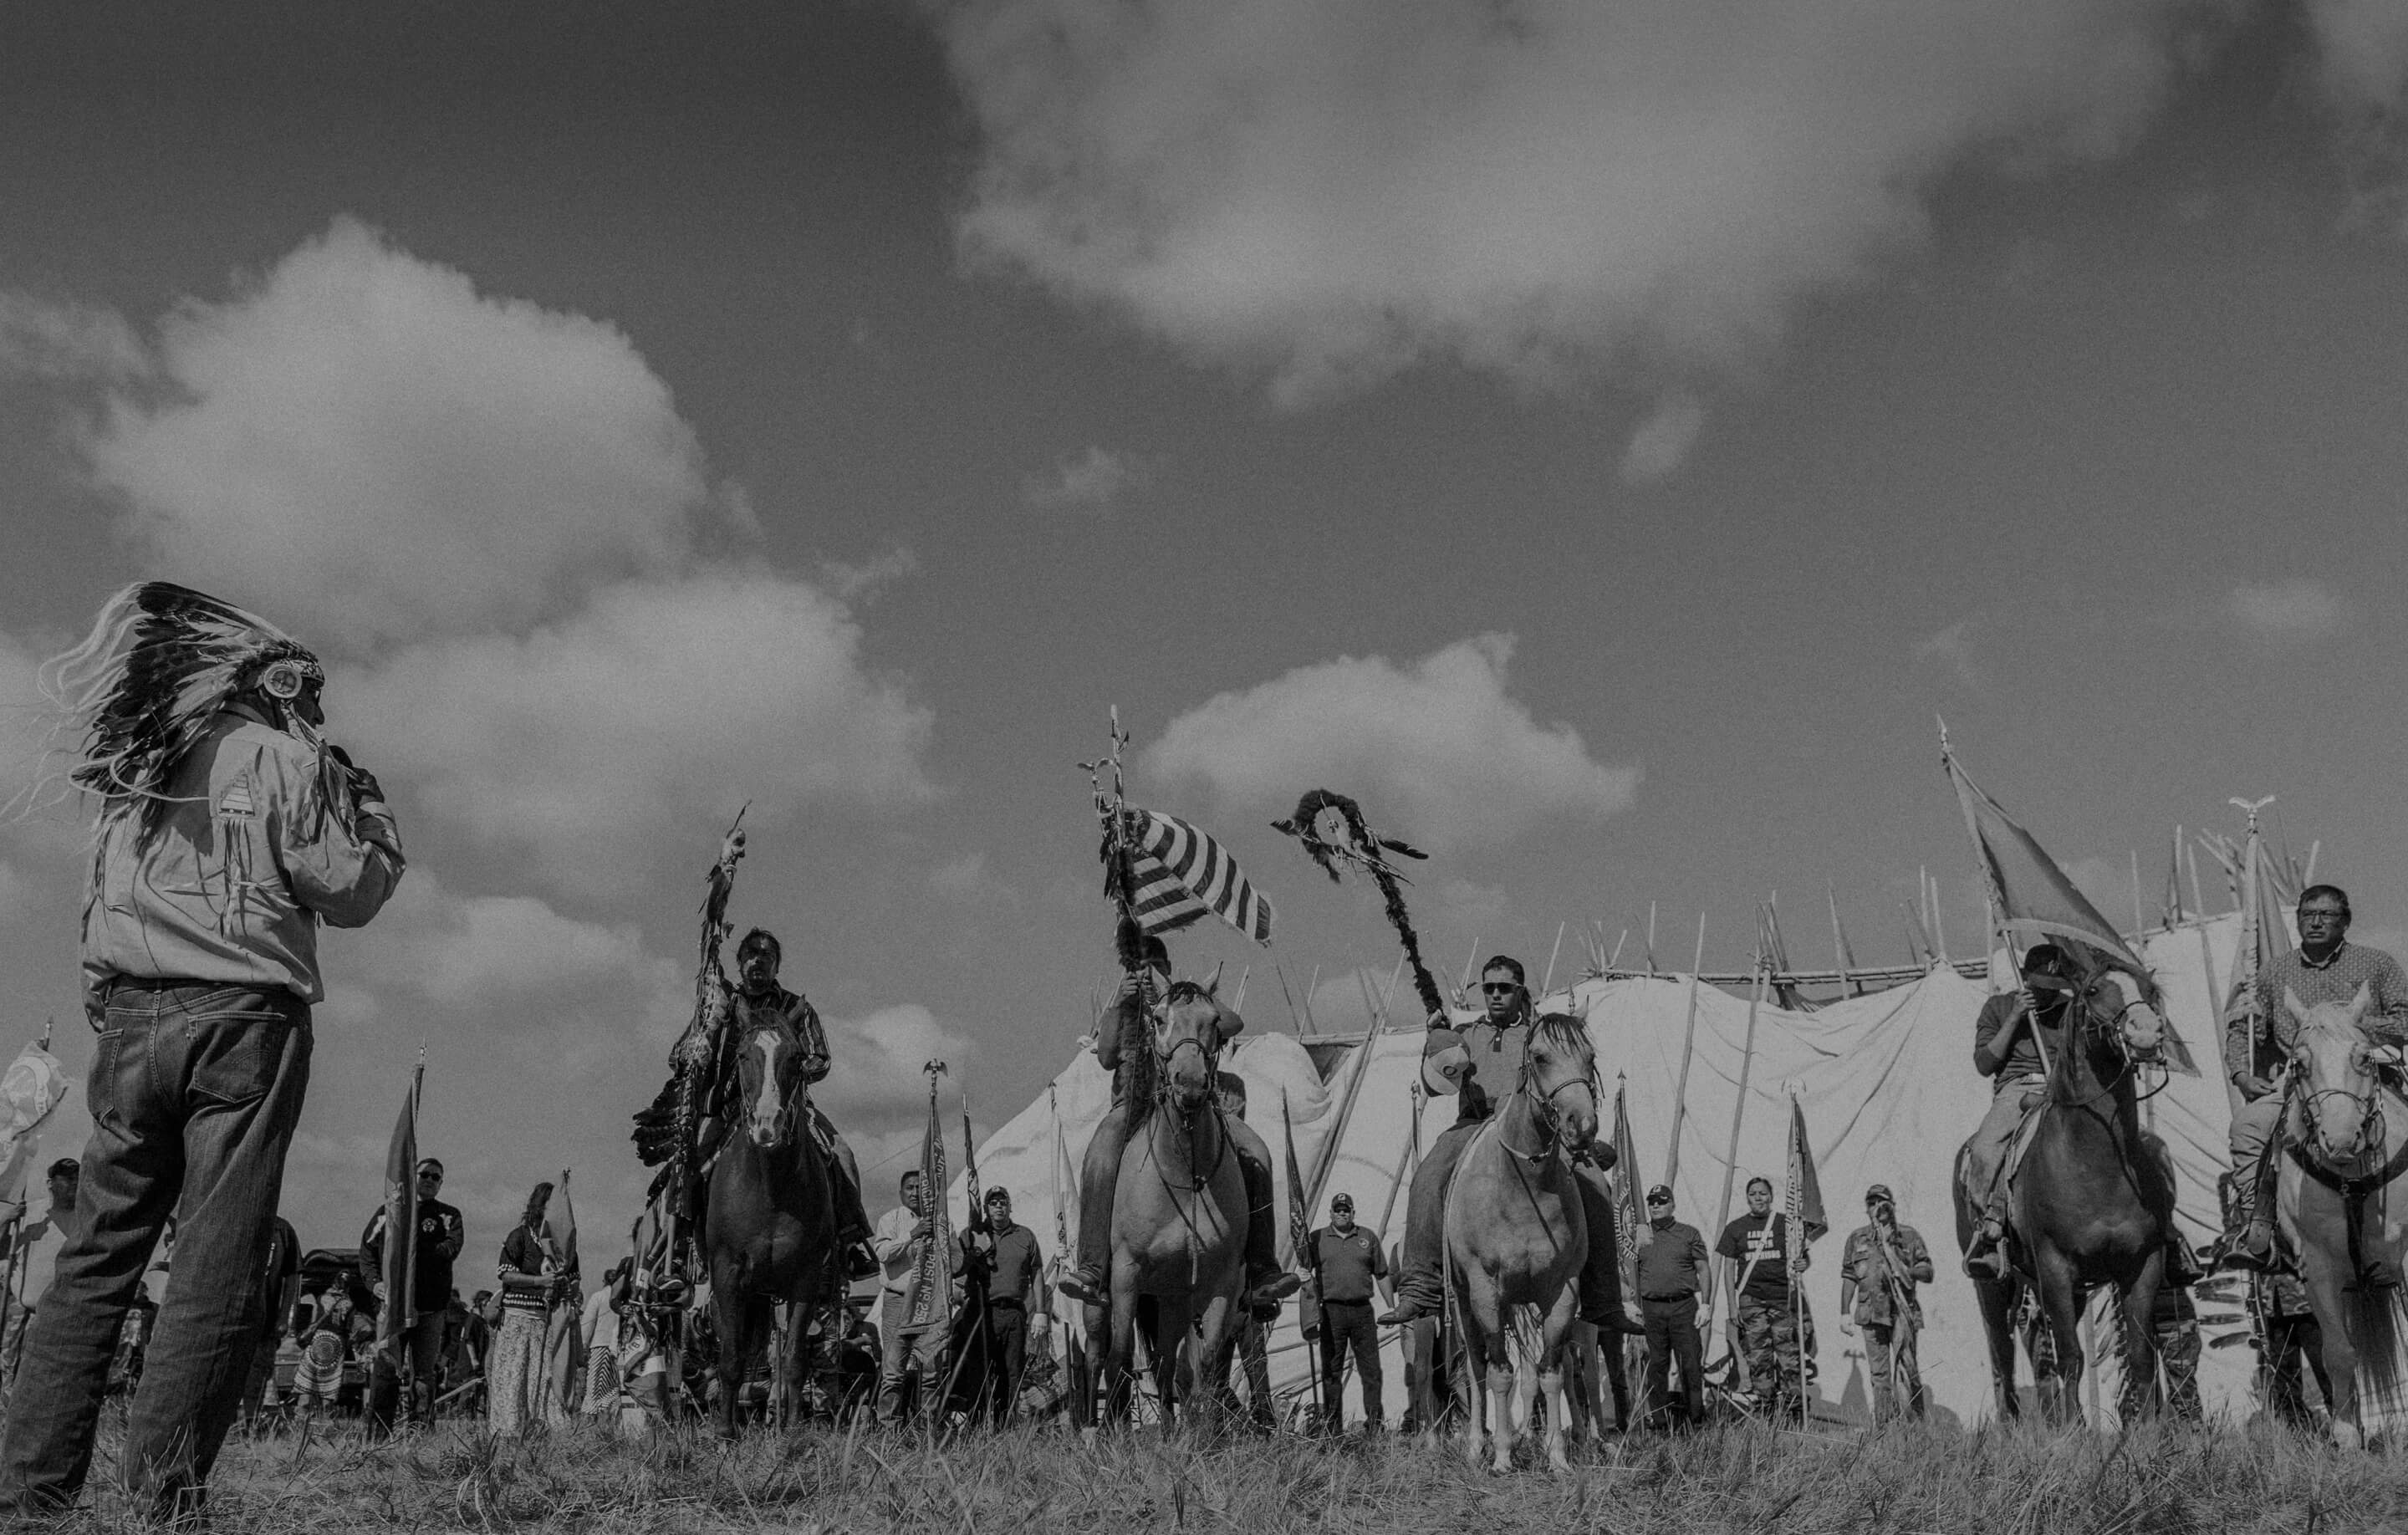 A low angle black and white photograph of Indigenous people on horseback with a large tipi and more people standing in the background